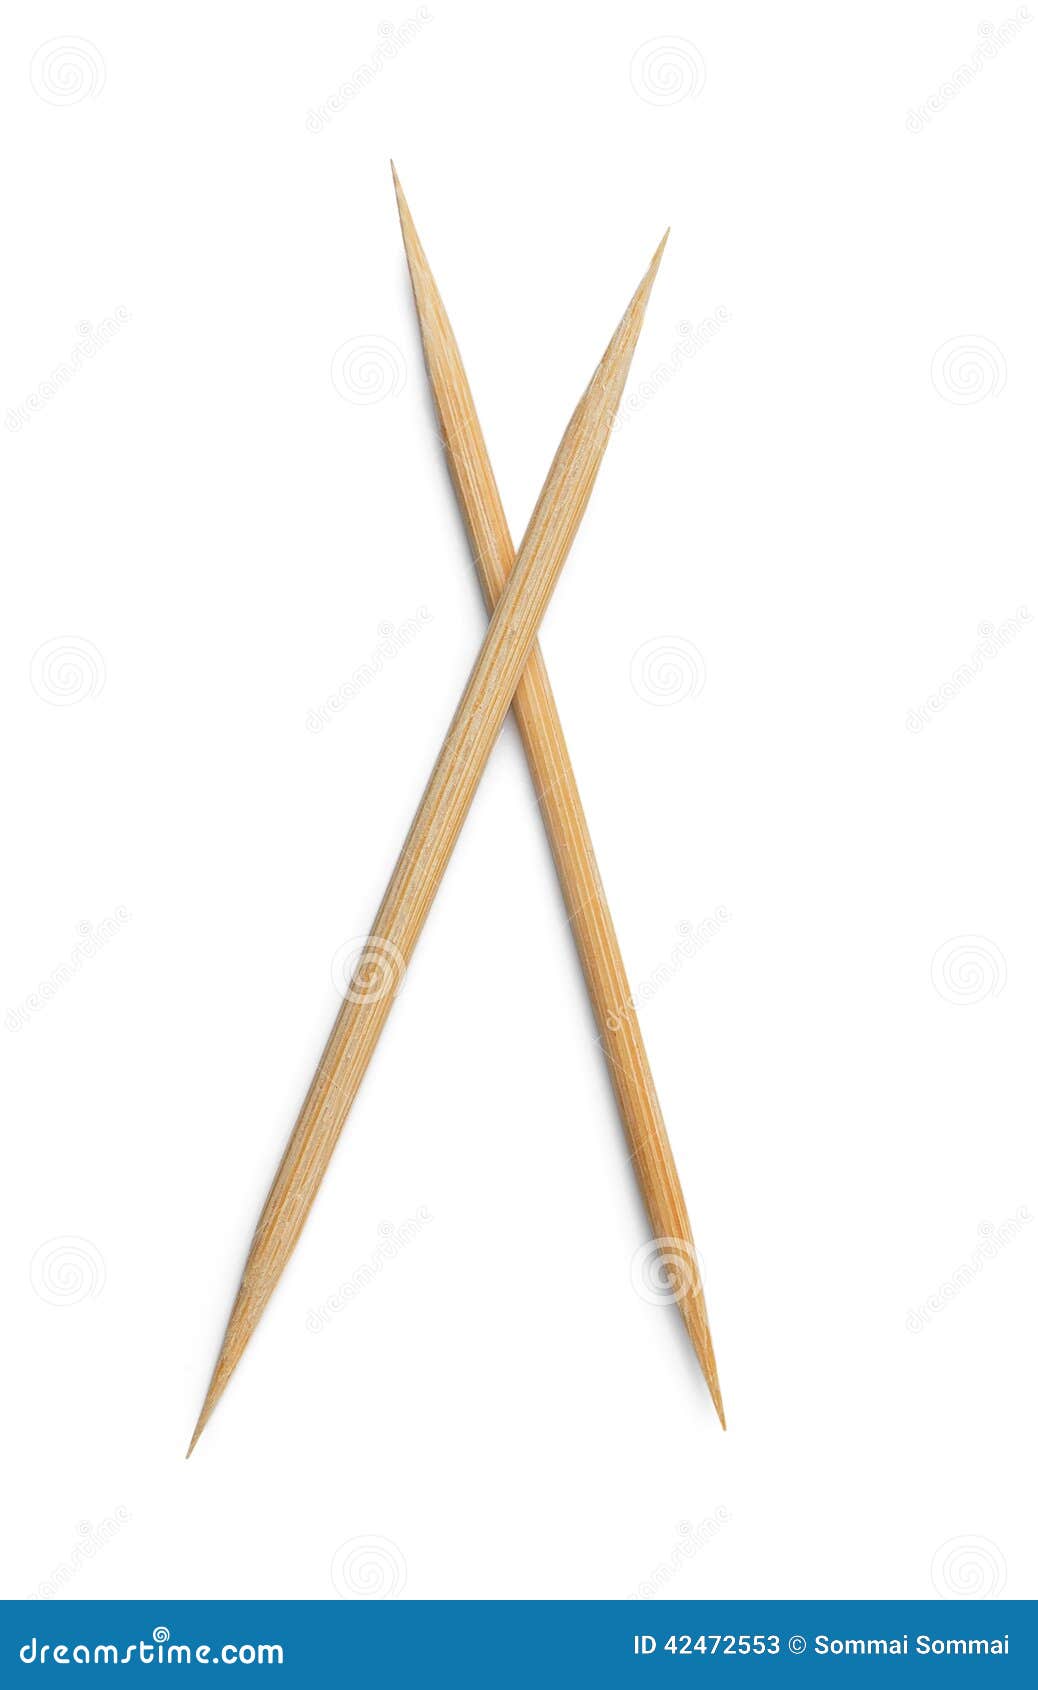 Toothpick On White Background Stock Image - Image of close, coffee